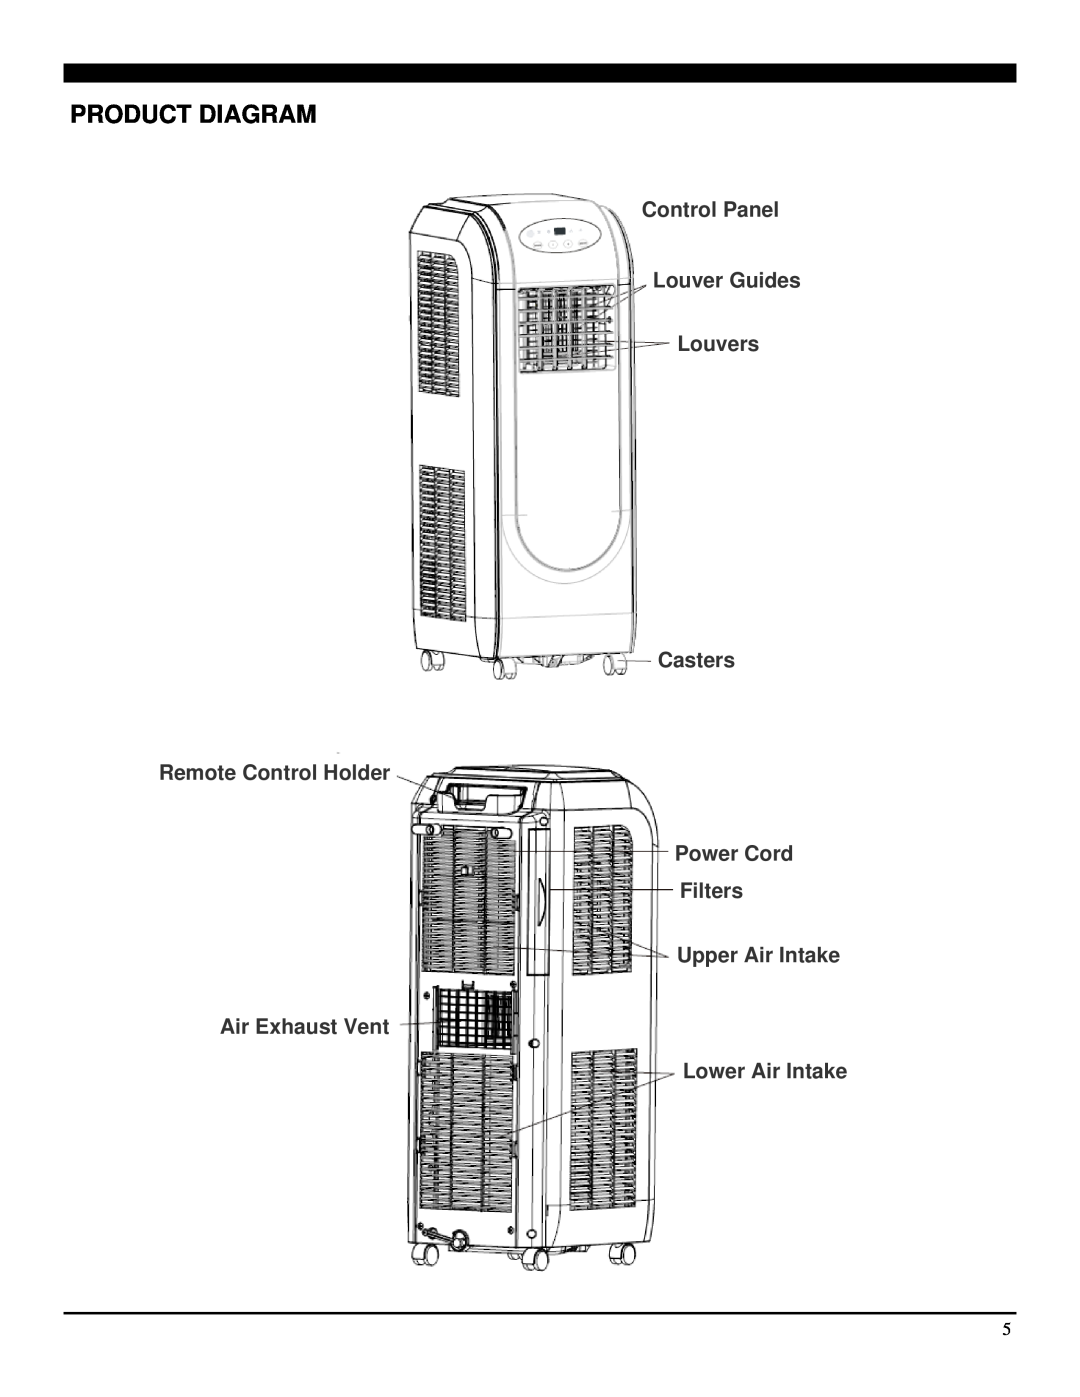 Soleus Air GH-PAC-10E5 Product Diagram, Control Panel Louver Guides Louvers Casters, Upper Air Intake Air Exhaust Vent 